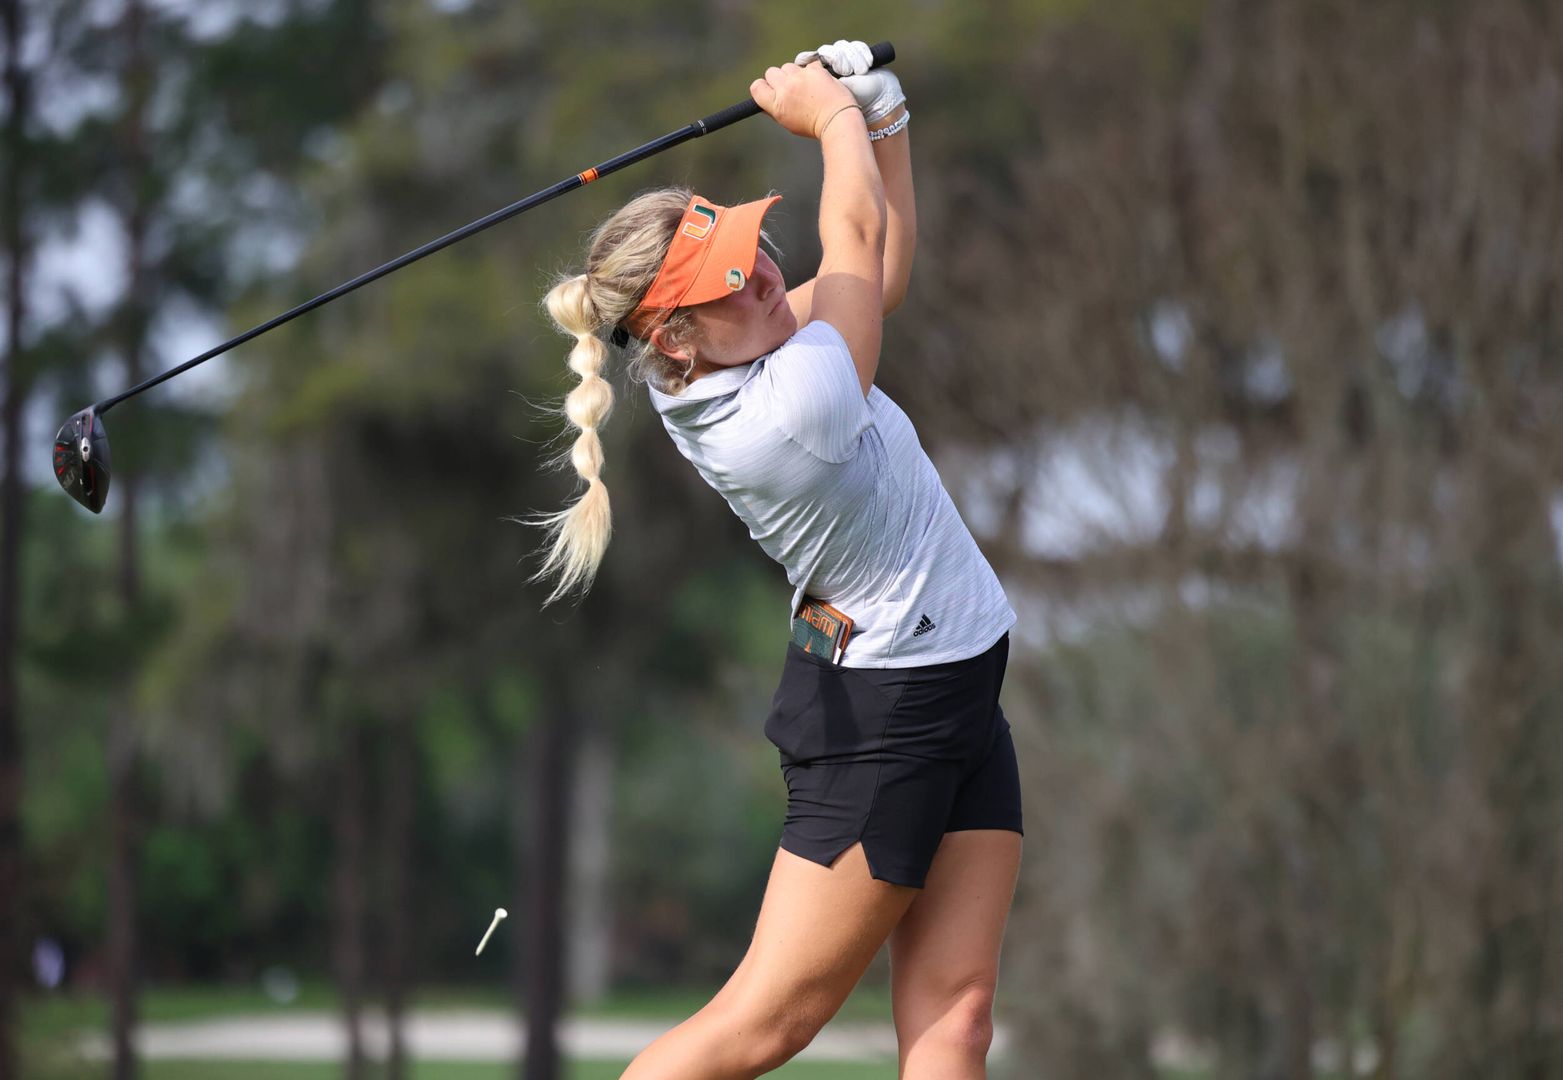 Byrne Has Top-20 Performance at the Gator Invitational